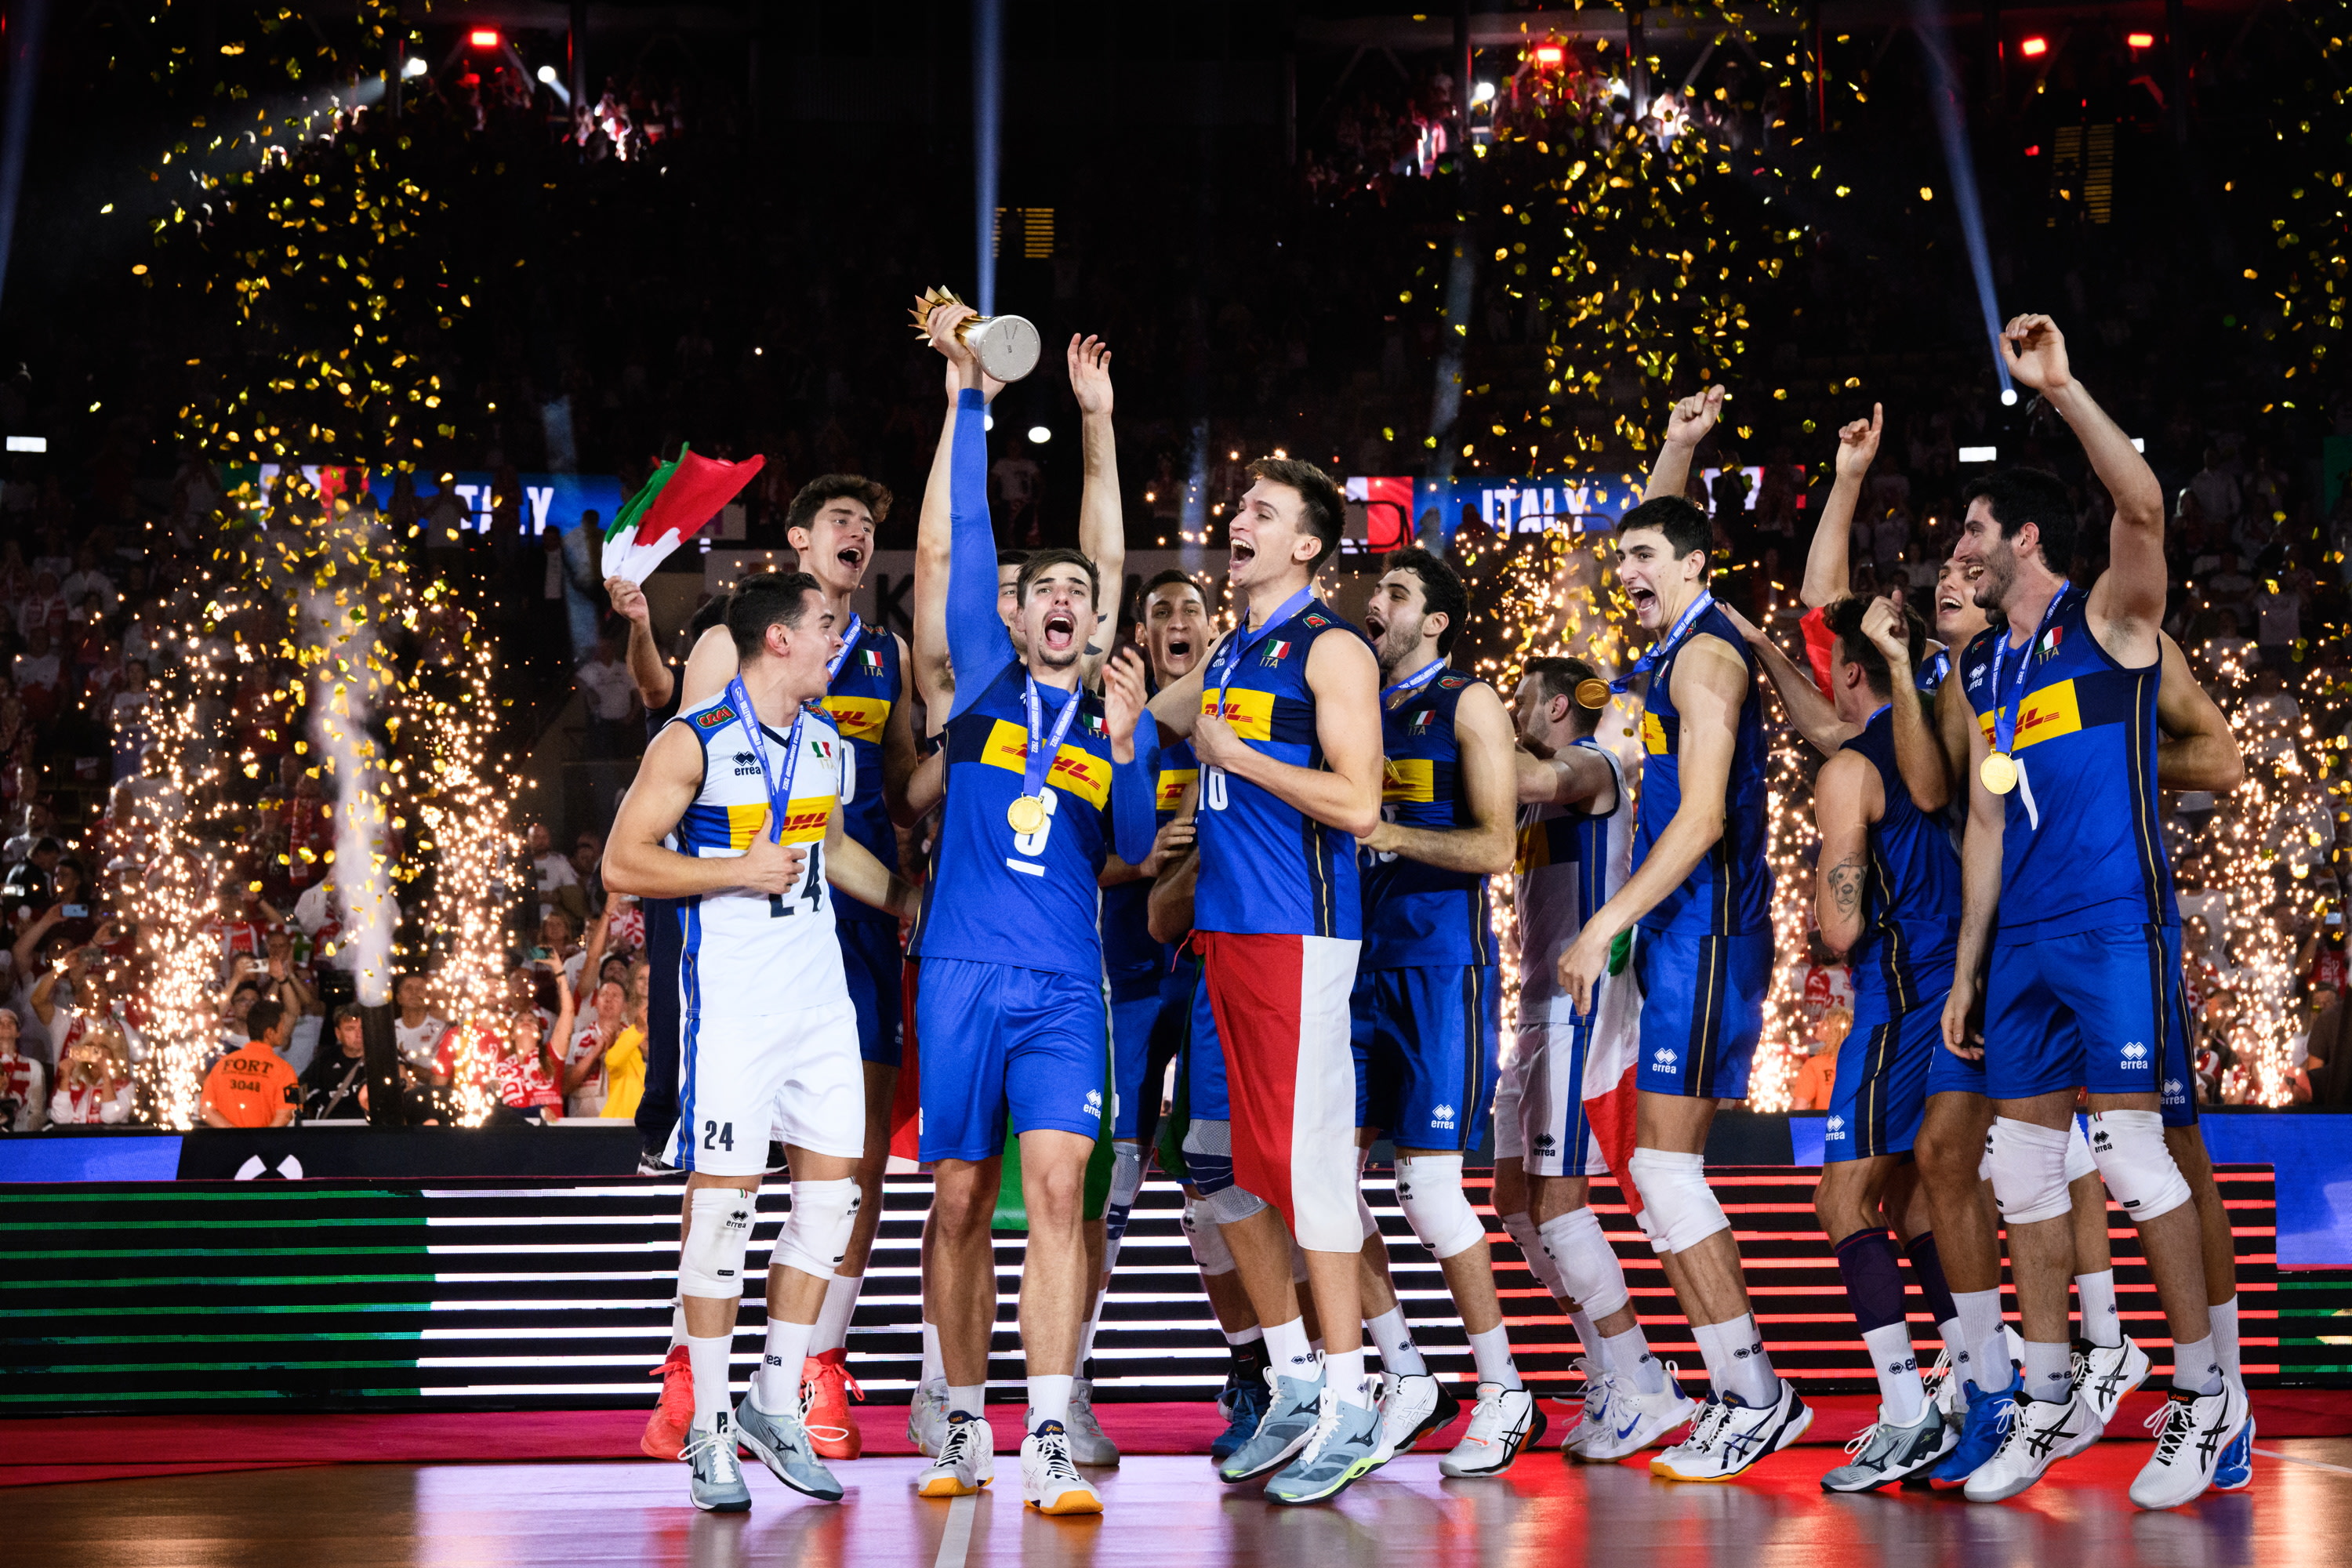 Fantastic Italy regain world title after 24 years